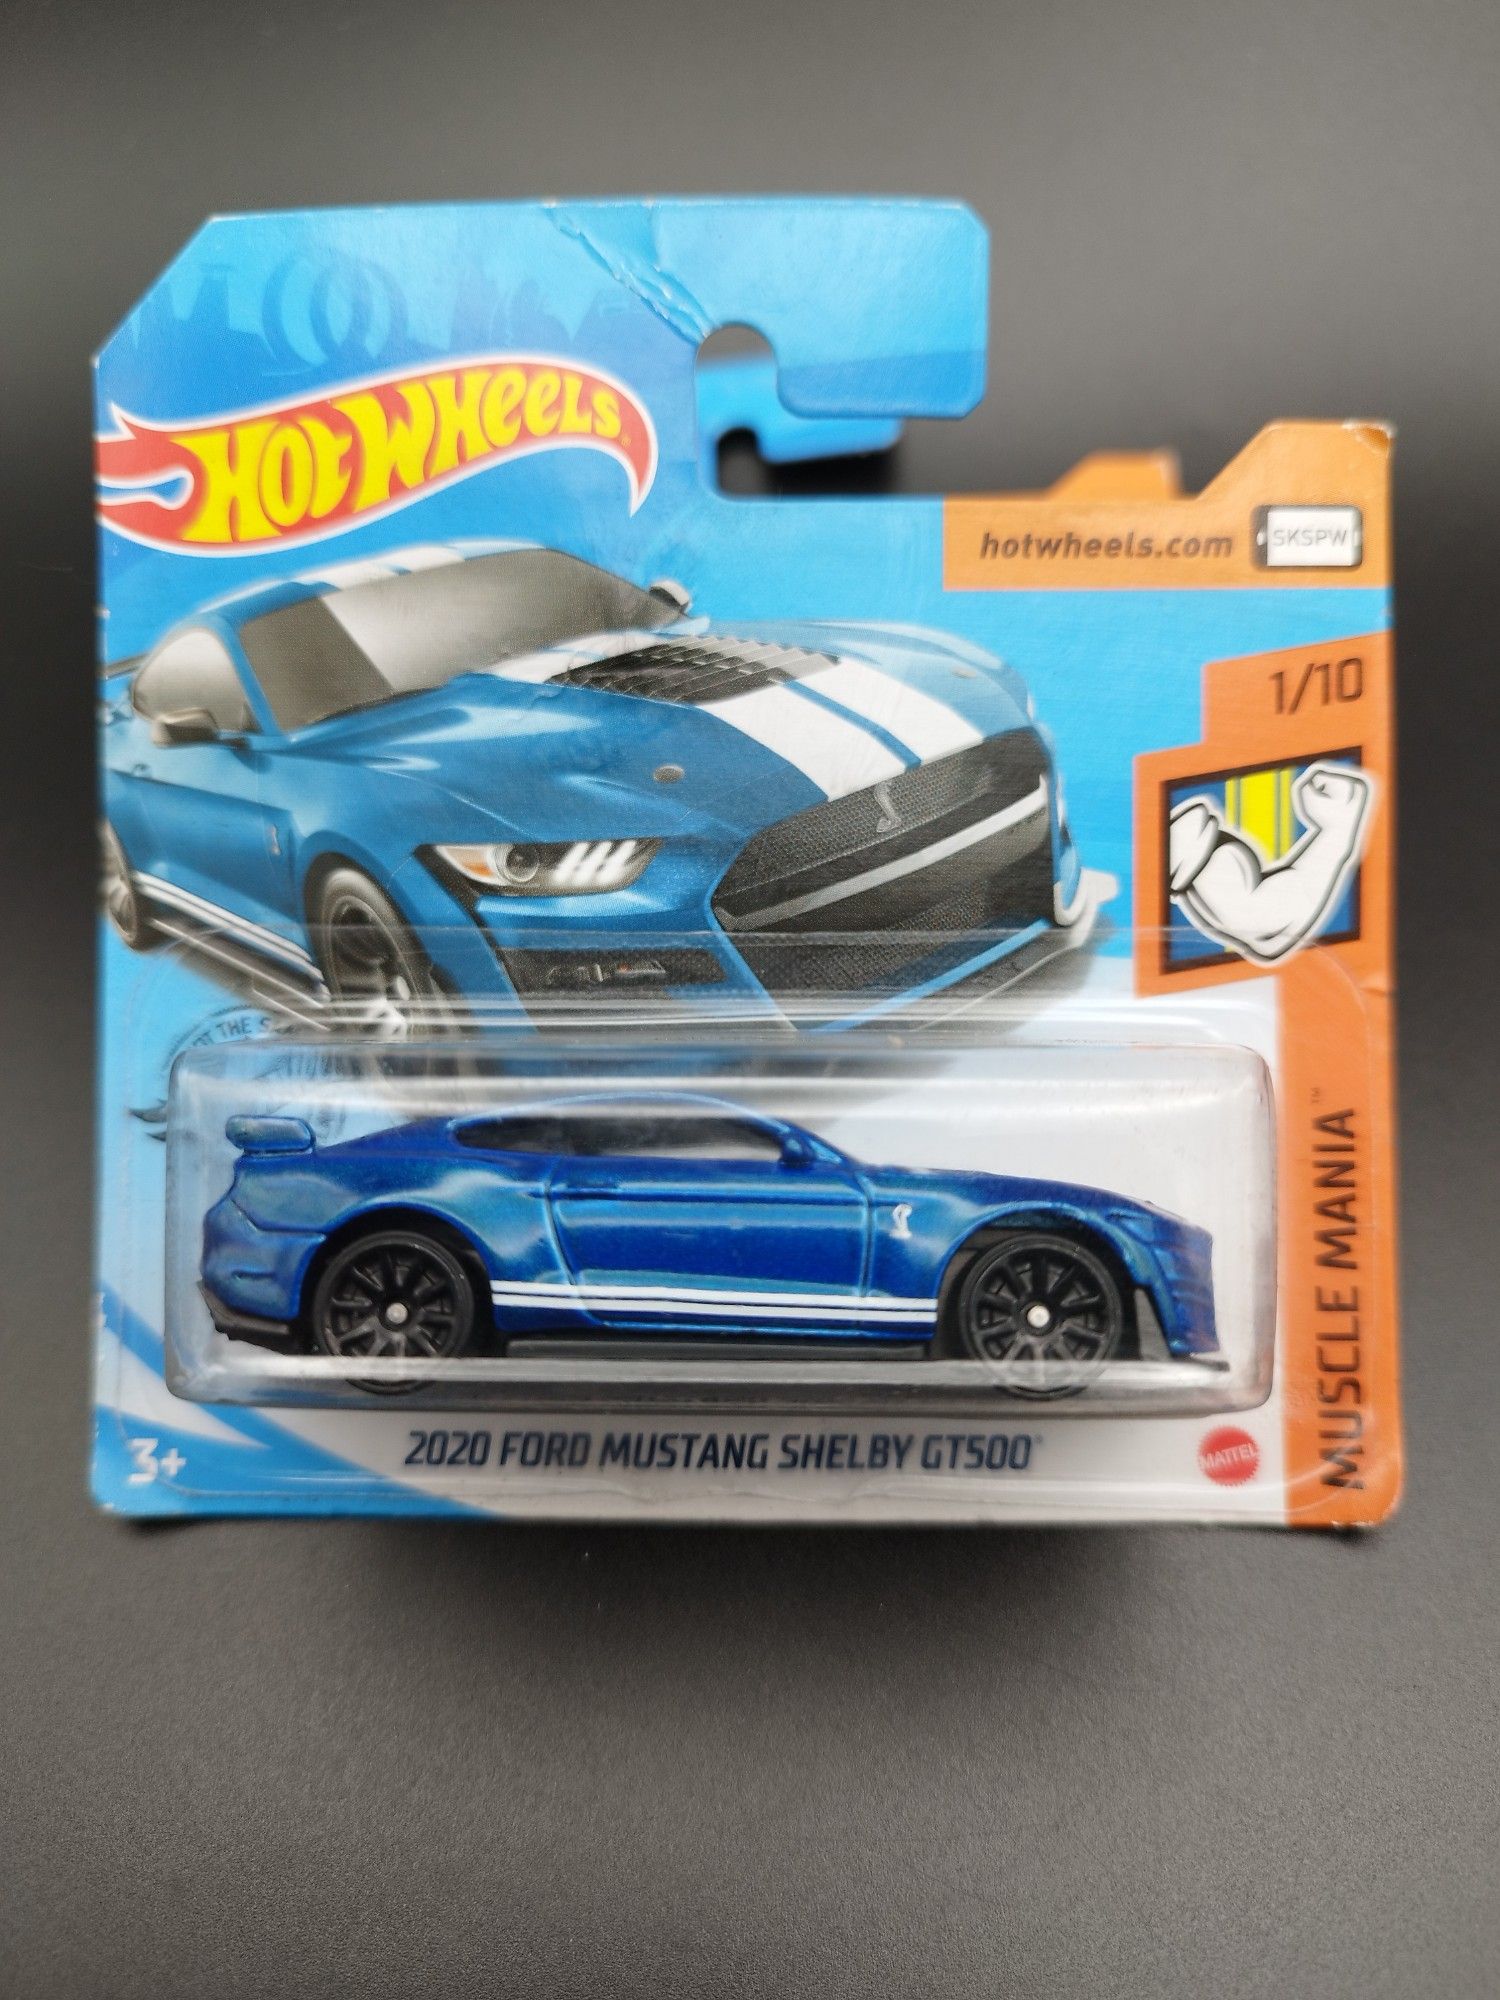 Hot Wheels 2020 Ford Mustang Shelby GT500 model